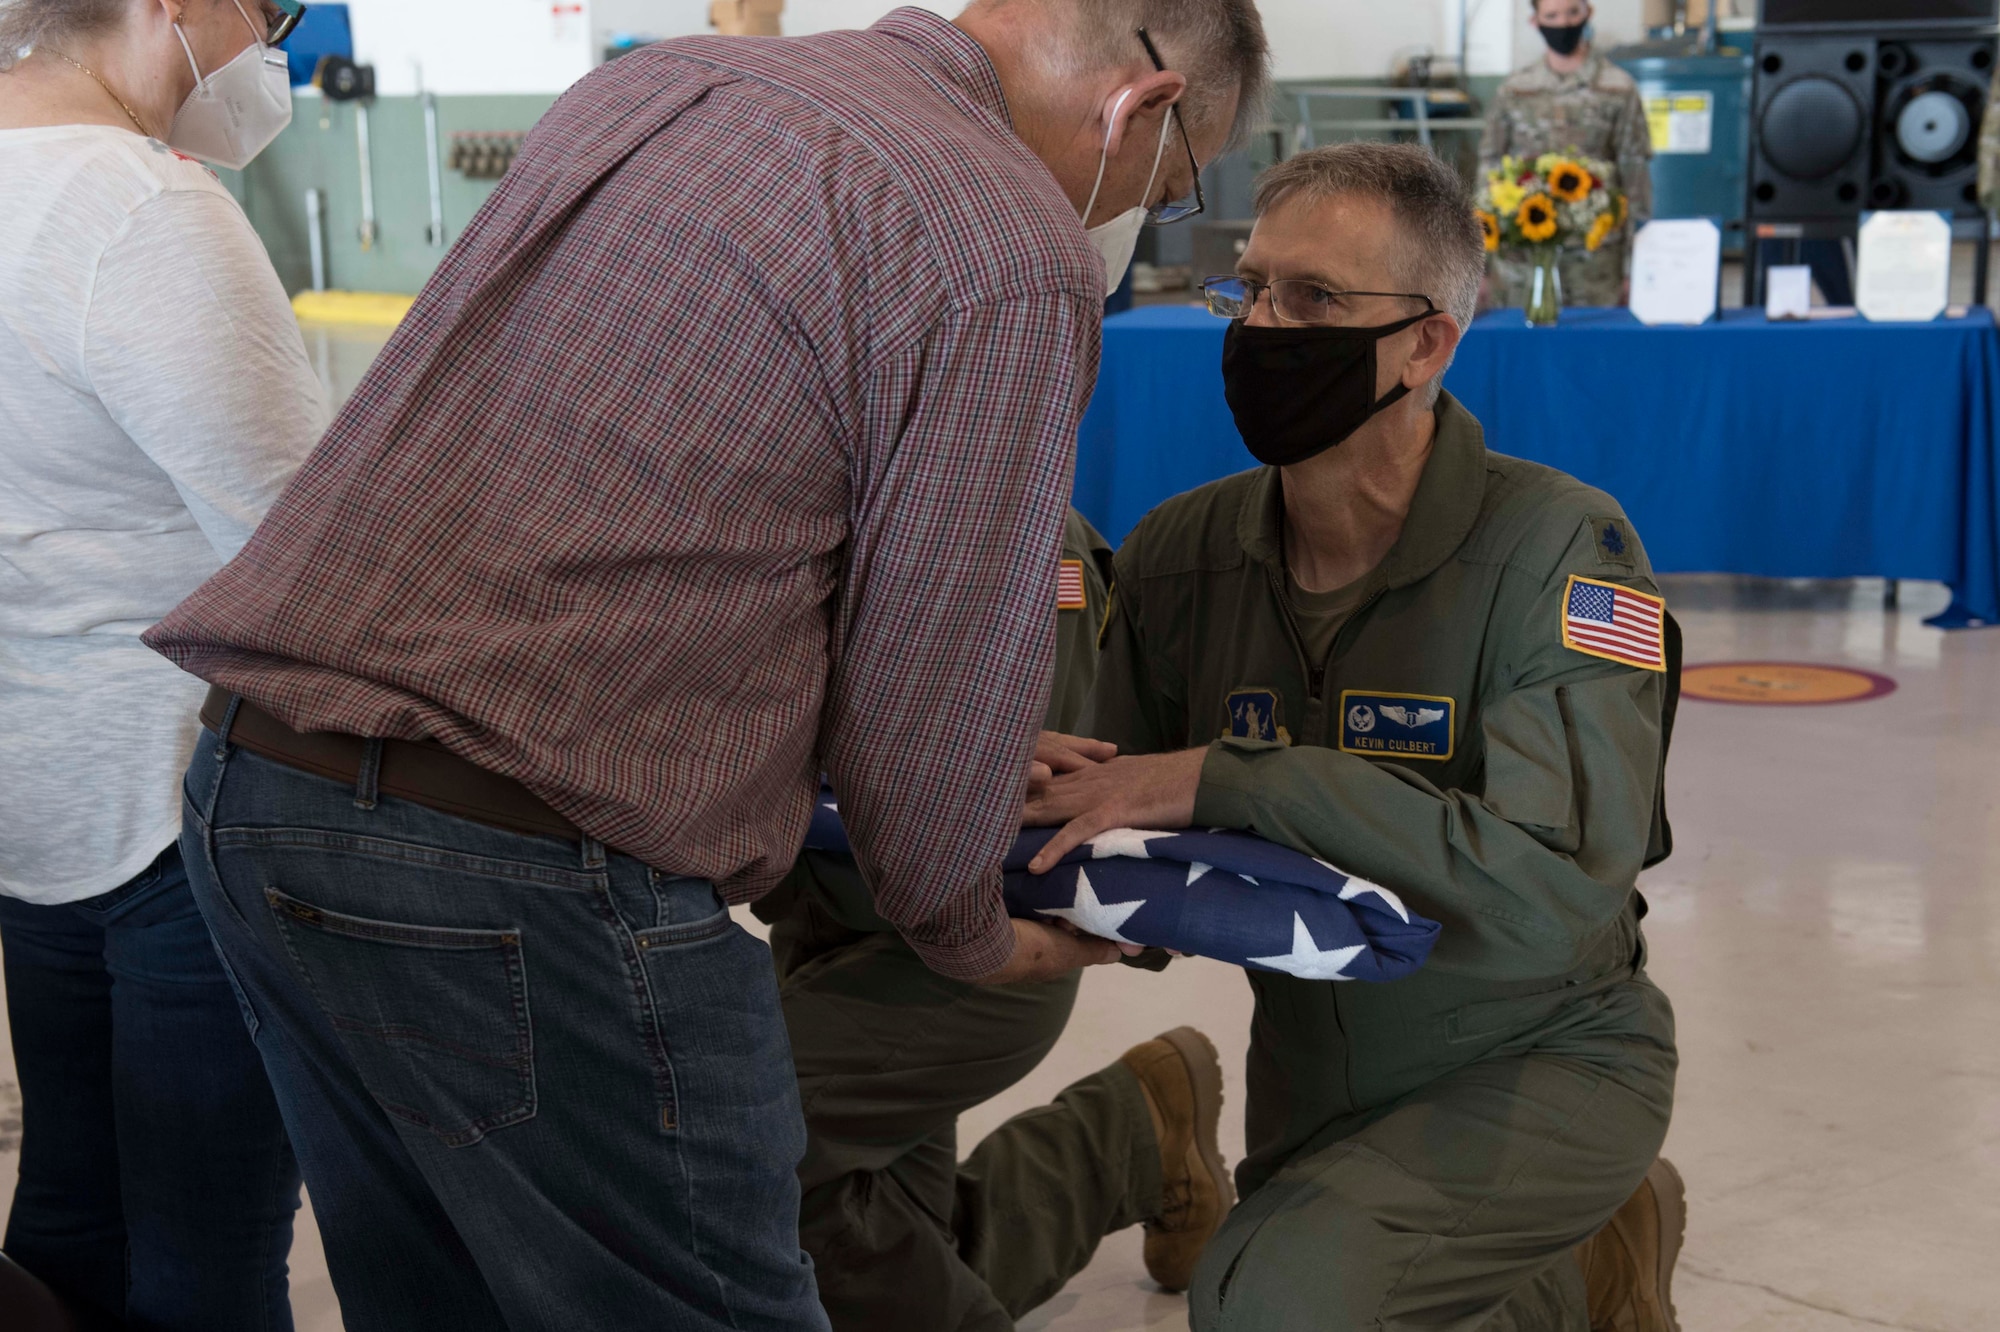 U.S. Air Force Lt. Col. Kevin Culbert, 167th Medical Group commander, presents a flag to William Rowekamp, brother of Lt. Col. Barry Rowekamp, during a memorial service held in a maintenance hangar at the 167th Airlift Wing, Martinsburg, West Virginia, Aug. 19, 2021. Rowekamp was the wing’s chief of aerospace medicine. (U.S. Air National Guard photo by Senior Master Sgt. Emily Beightol-Deyerle)